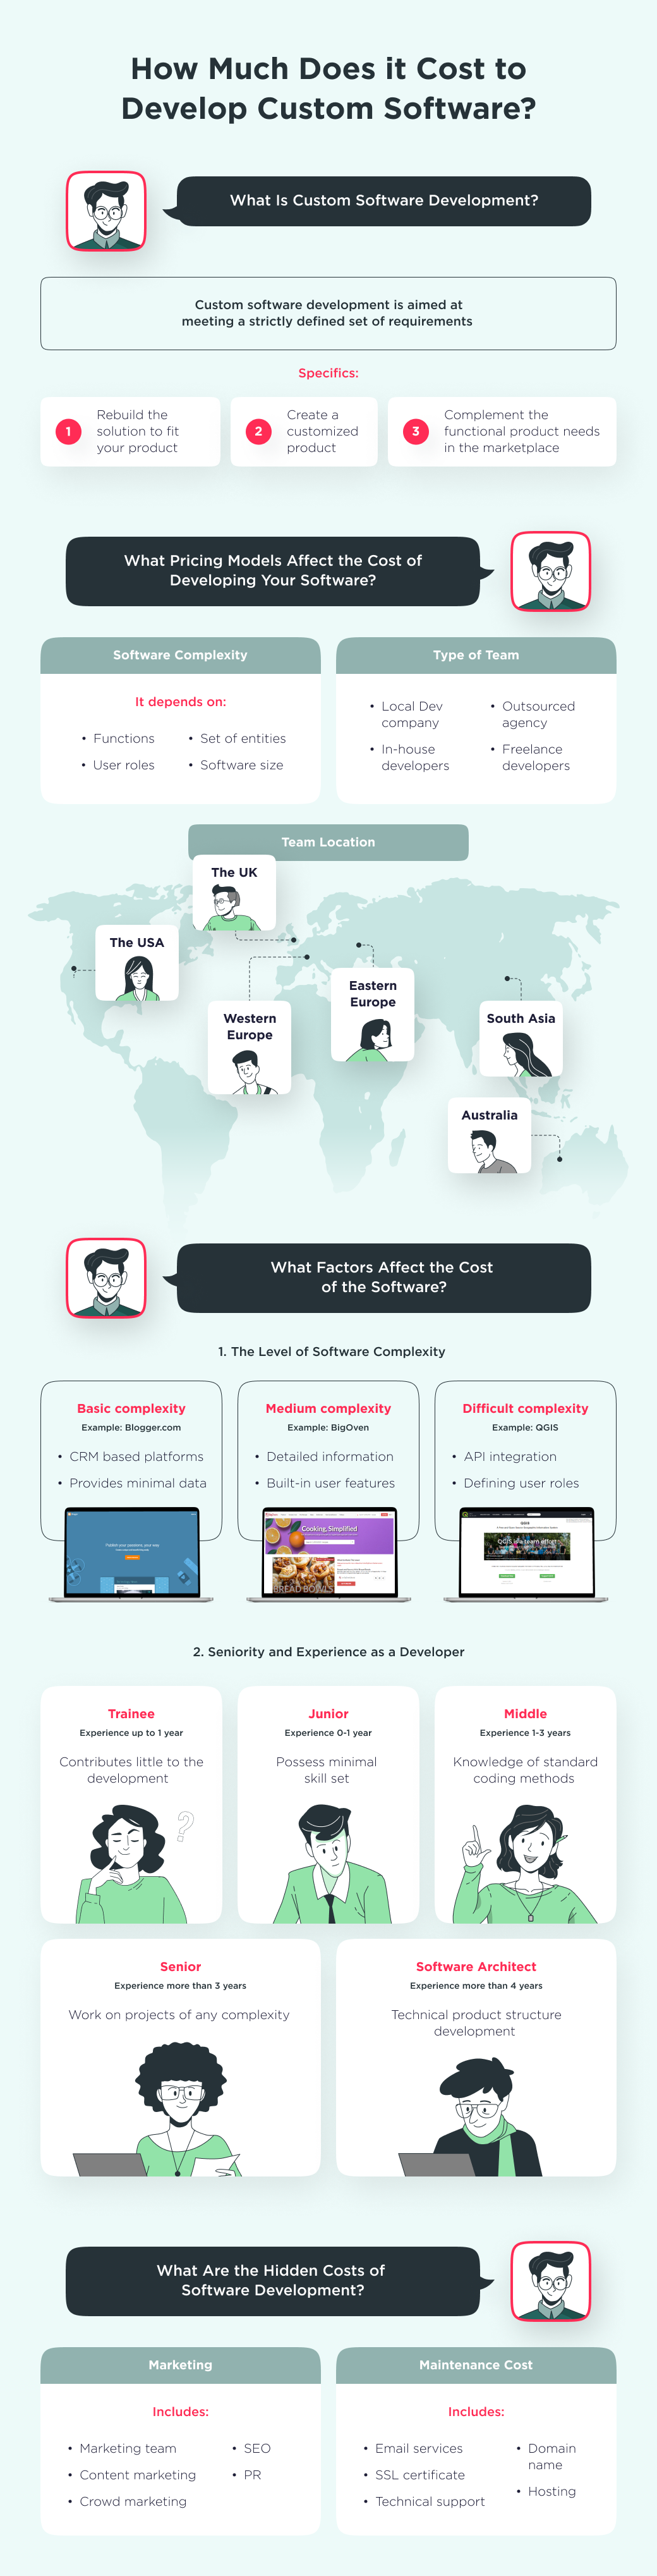 This infographic shows the main factors that affect the cost of custom software development